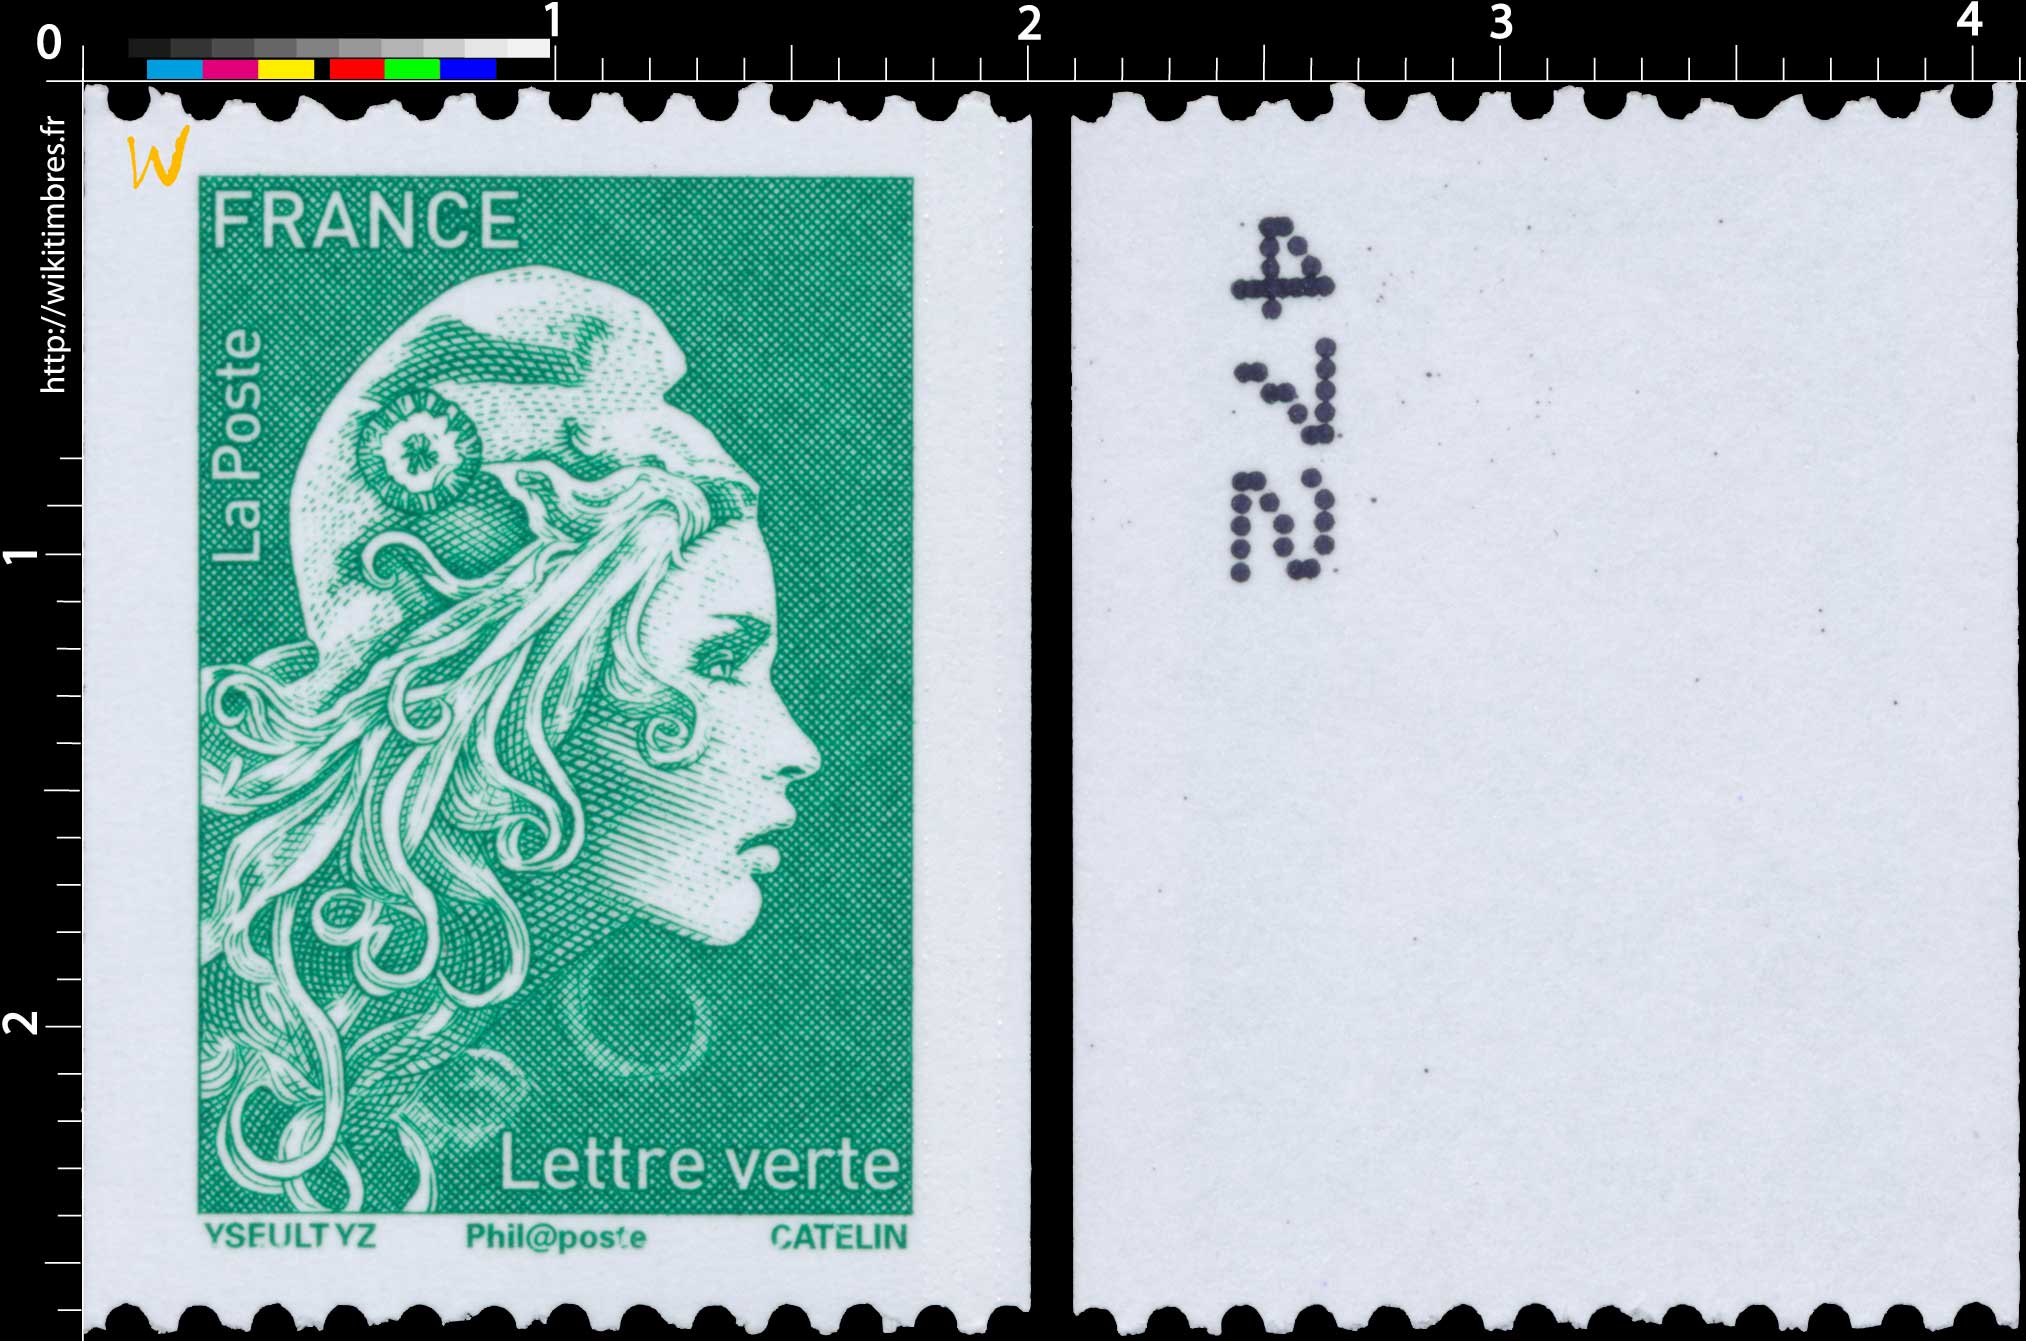 2018 Type Marianne l'engagée d'Yseult